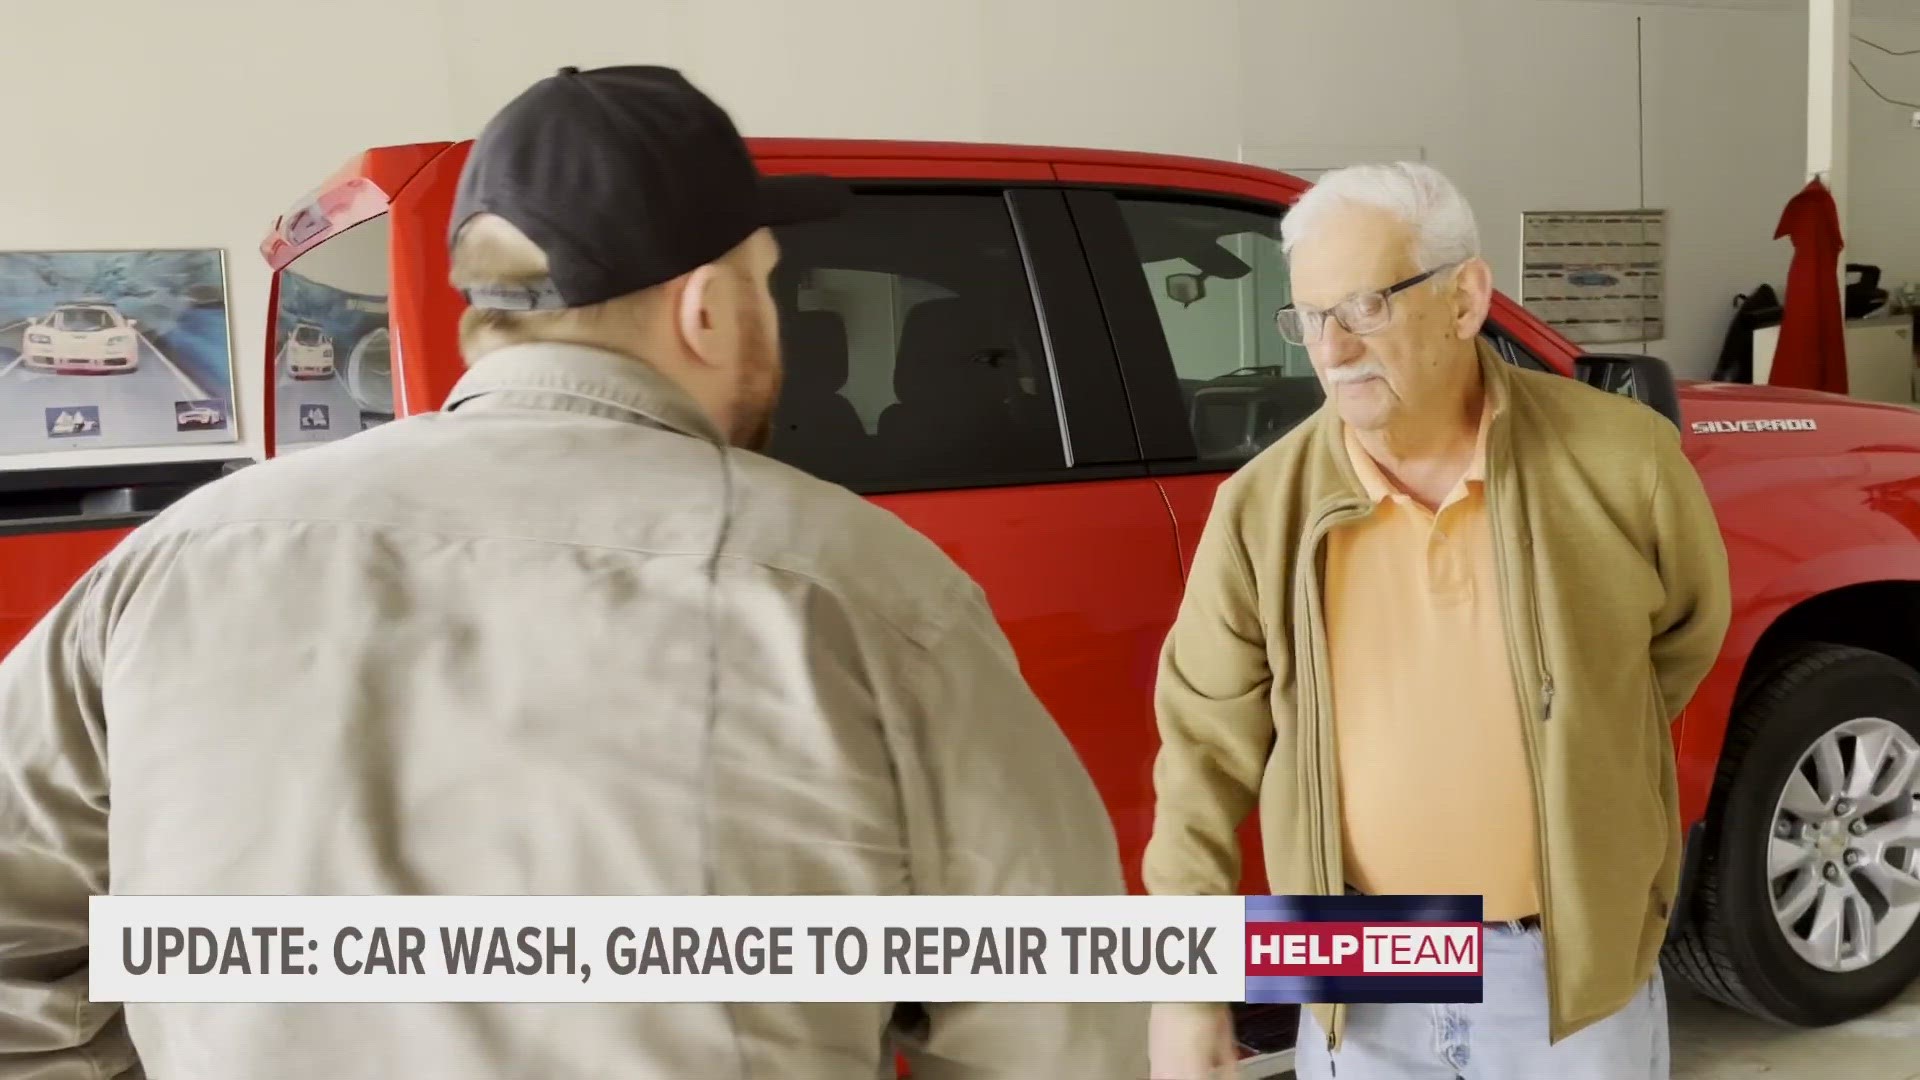 Two auto repair shops have agreed to help the Hudsonville man whose truck was damaged in a local car wash.